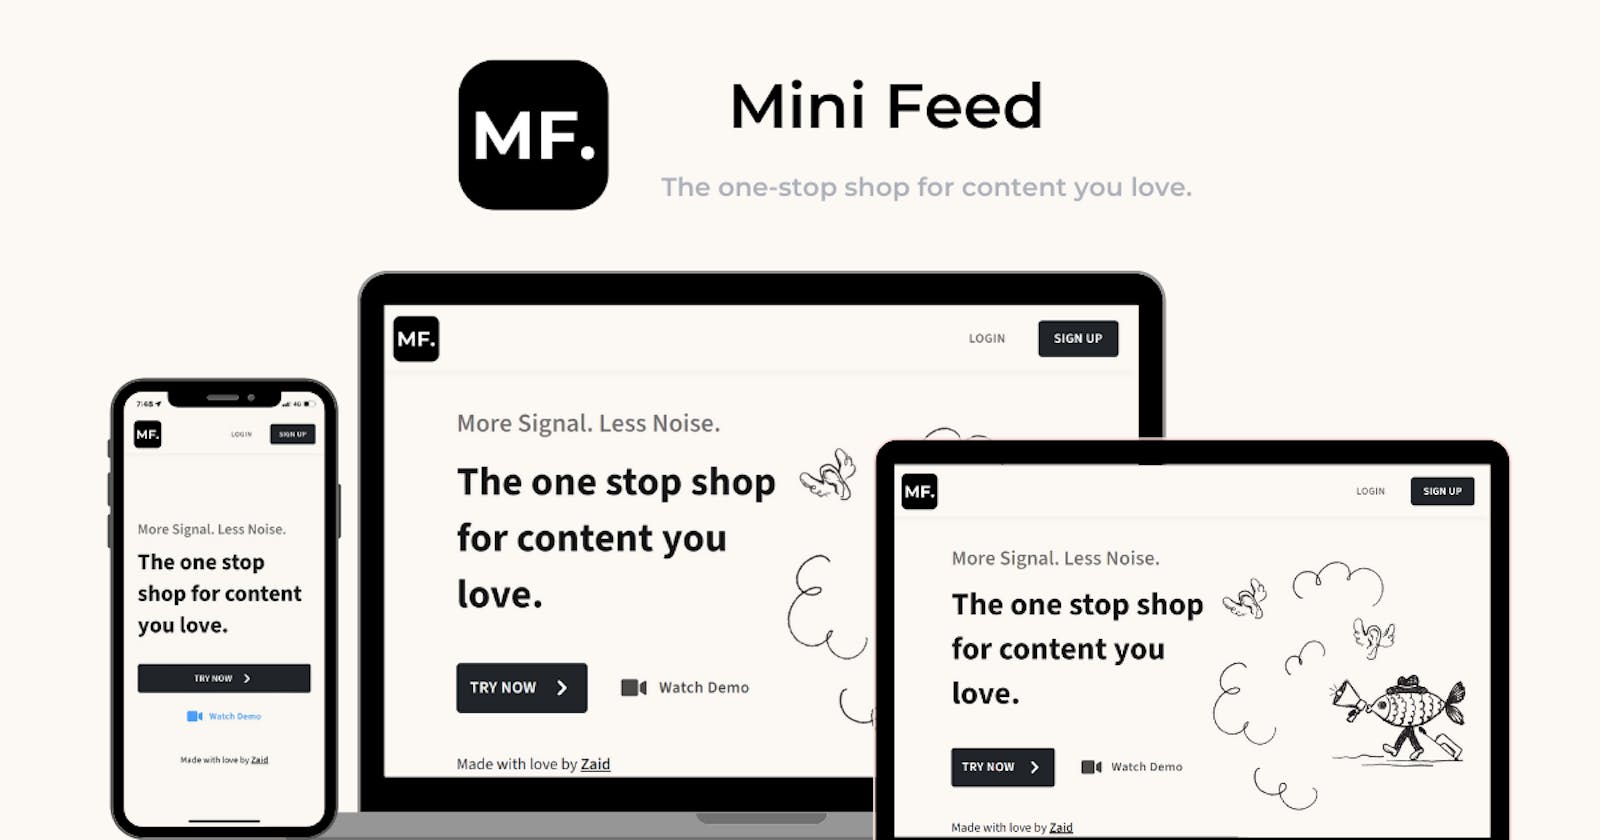 Introducing Mini Feed - The one-stop shop for content you love